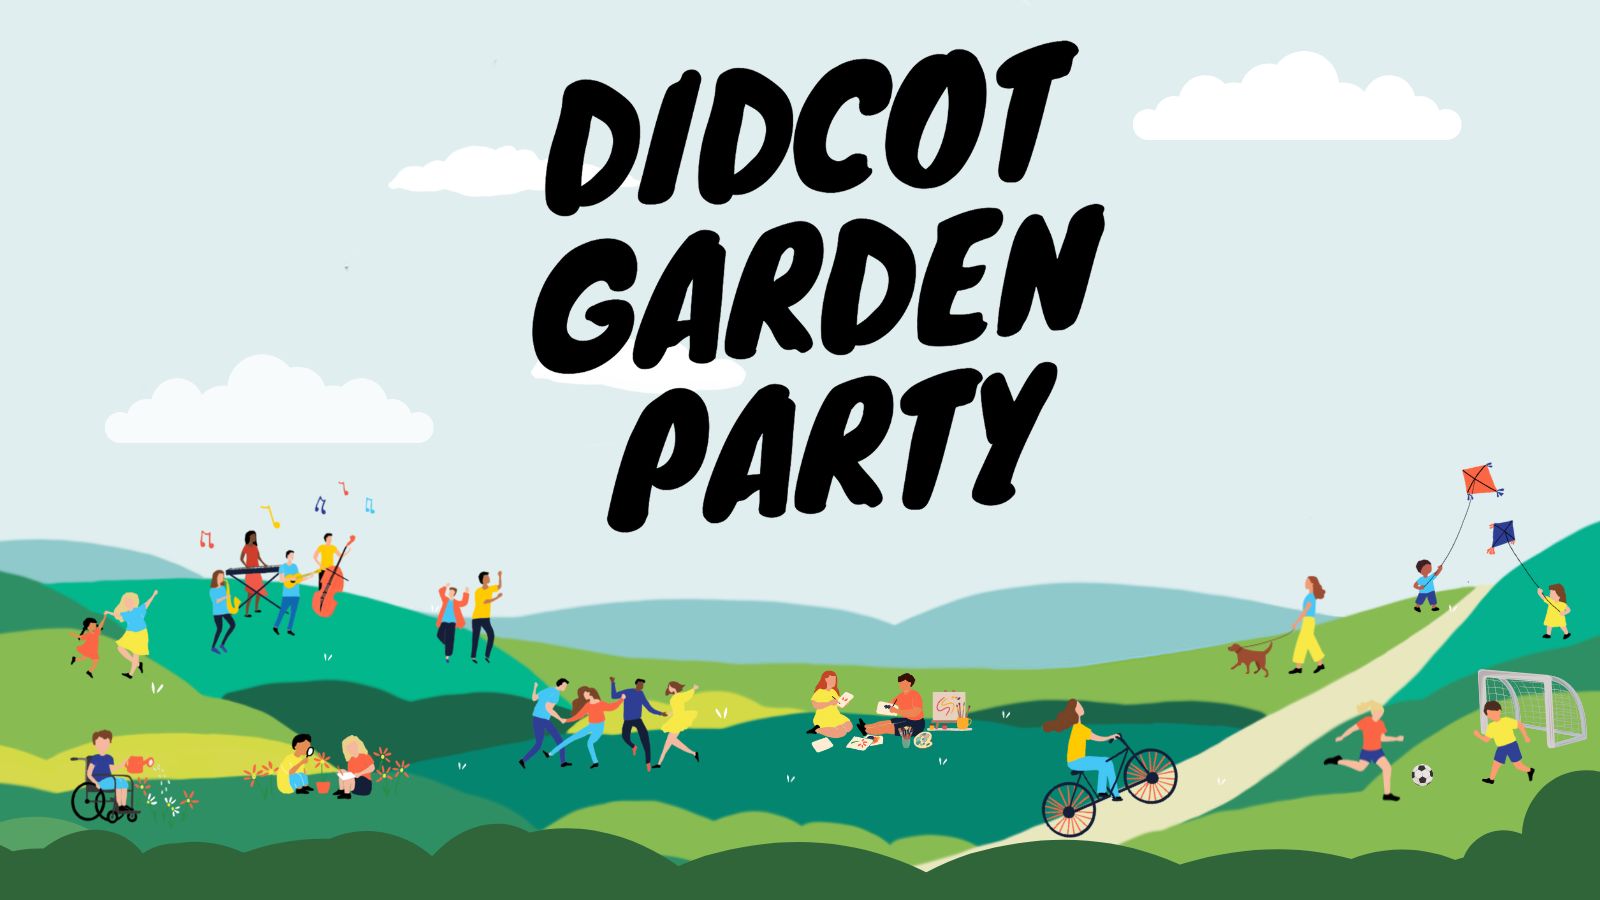 Didcot Garden Party has something for everyone to enjoy this summer